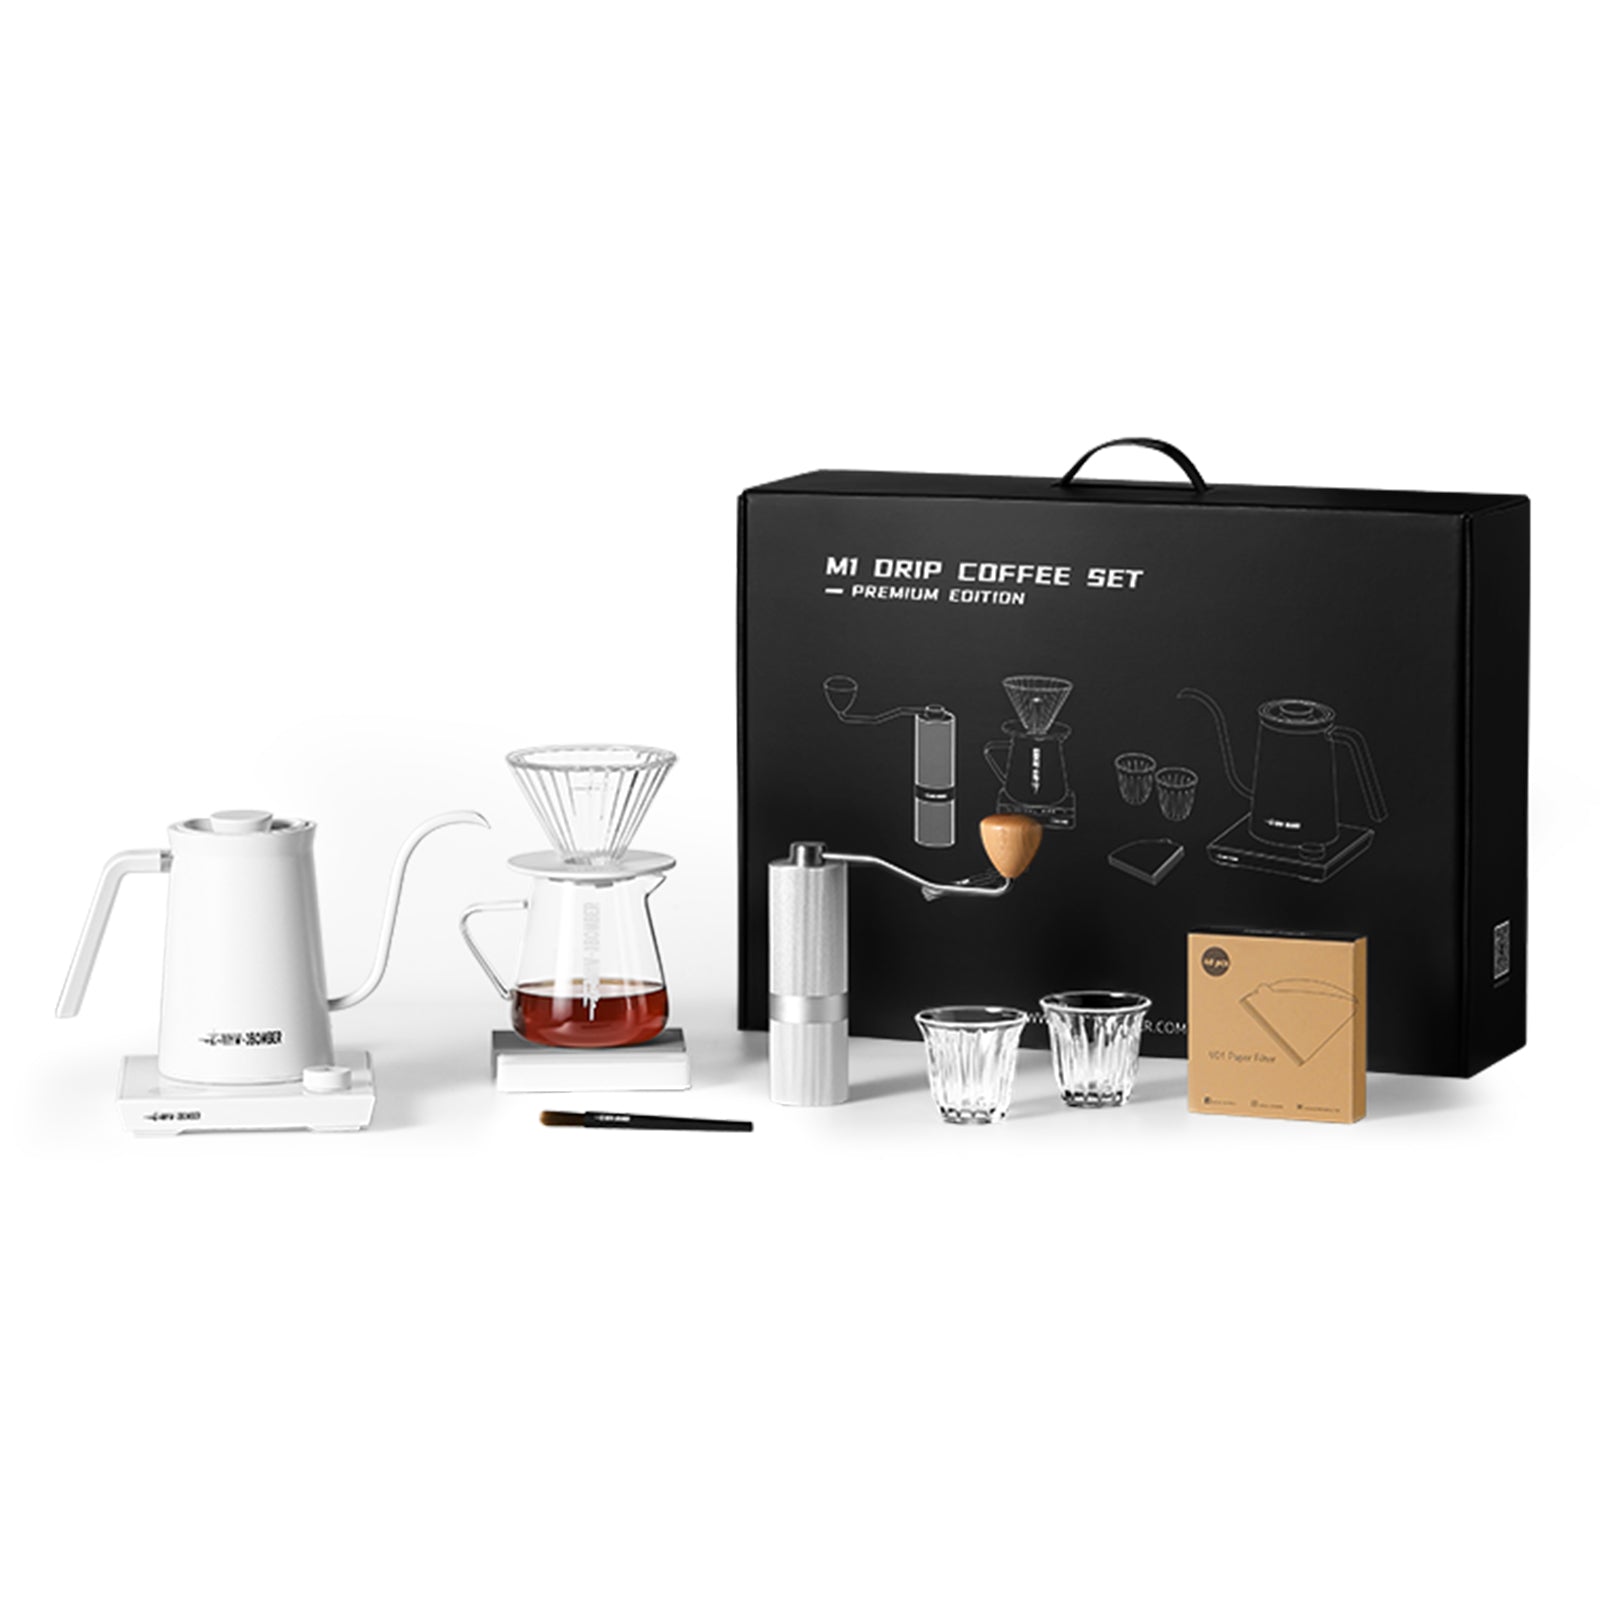 MHW-3BOMBER Assassin M1 Pour Over Coffee Set Deluxe